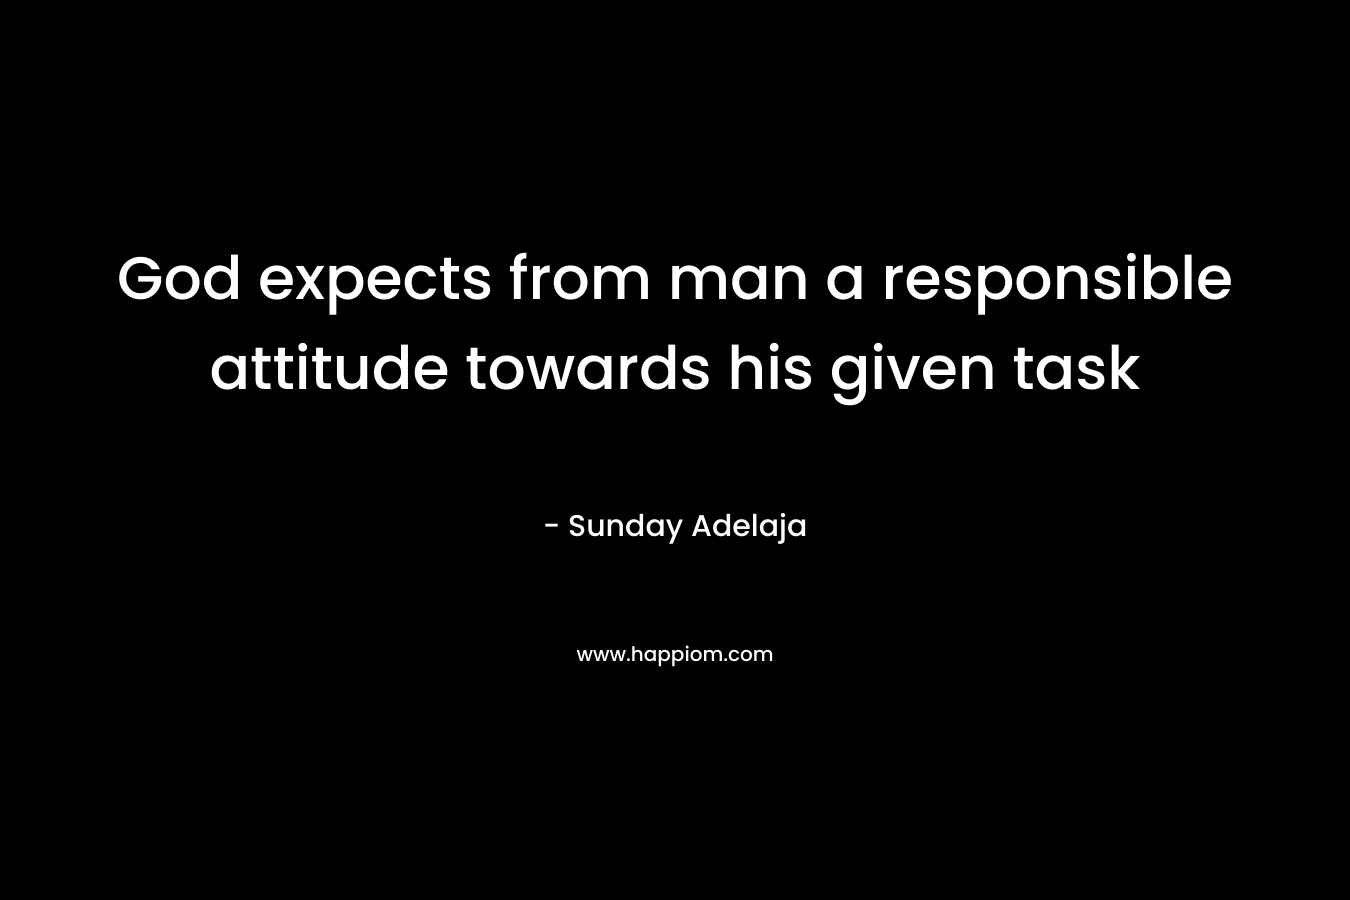 God expects from man a responsible attitude towards his given task